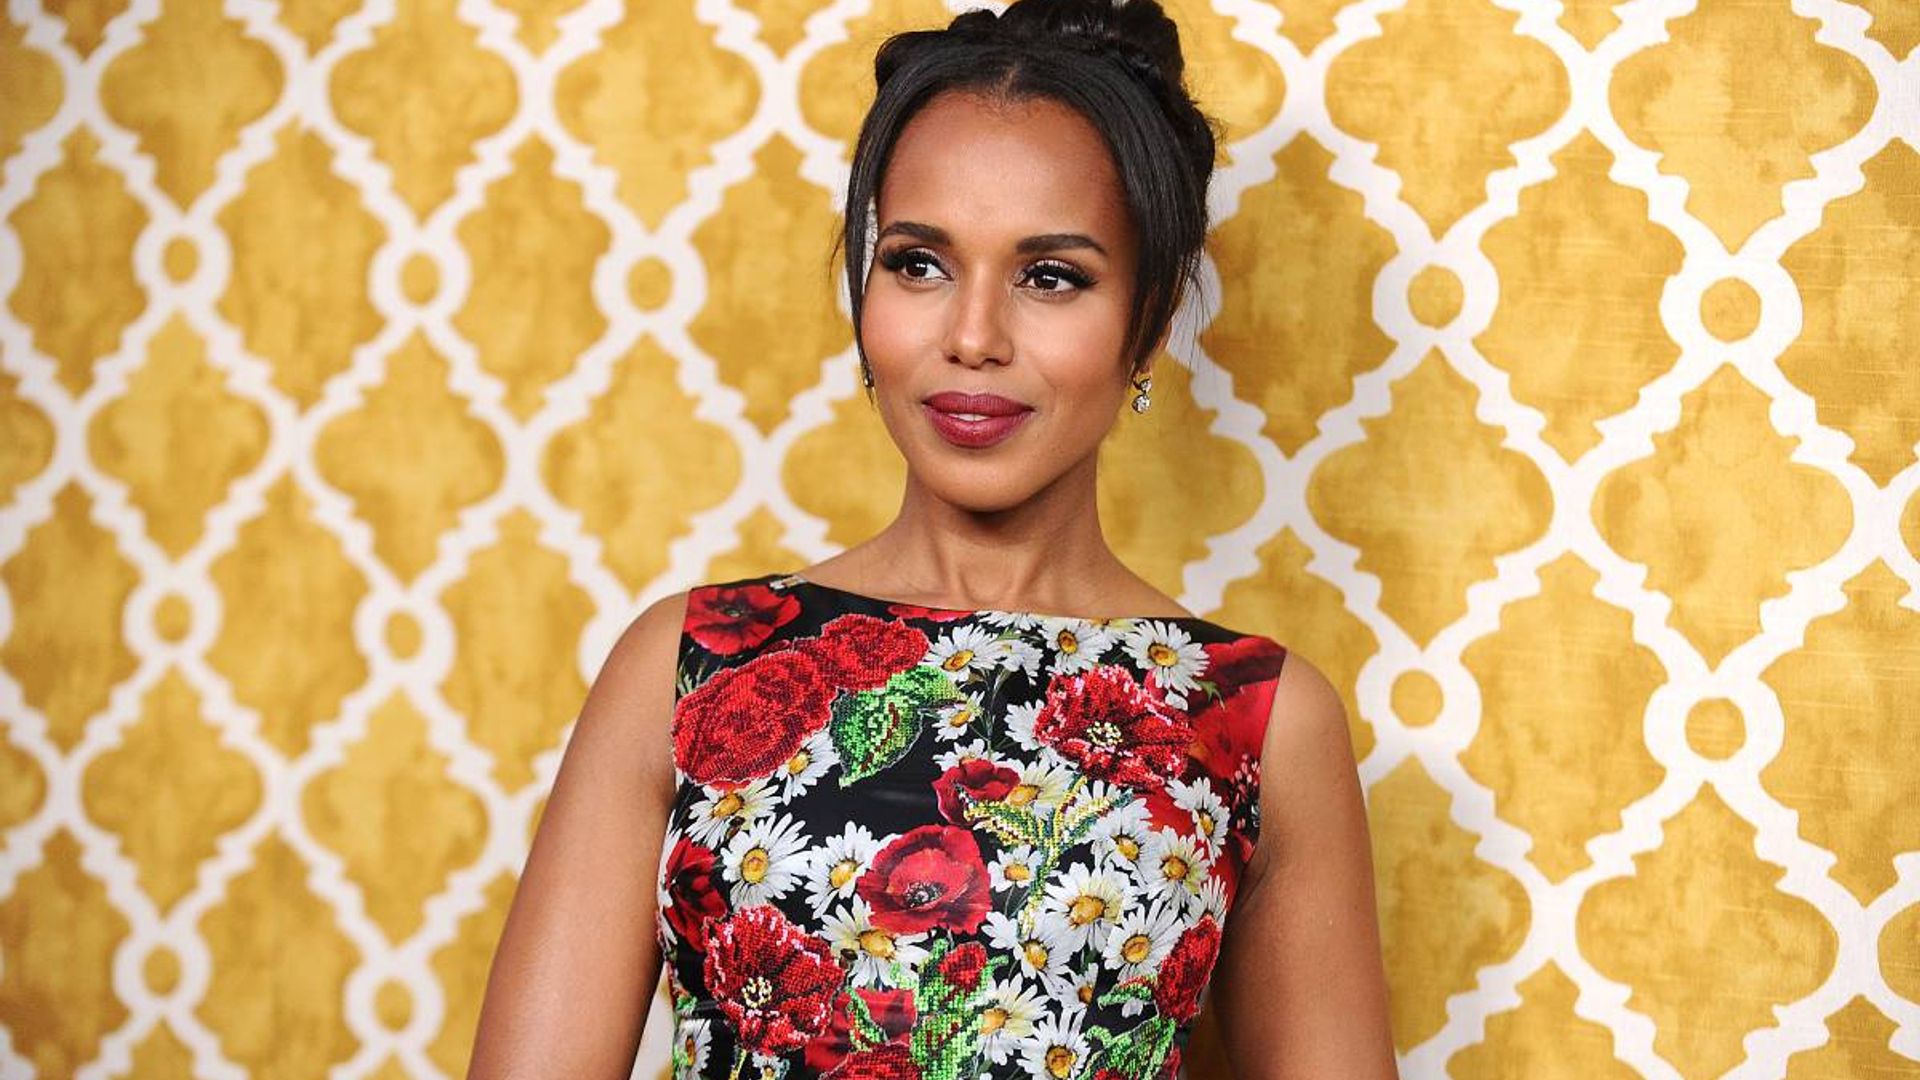 Kerry Washington looks like a vision in the glammest strapless dress - and we’re obsessed